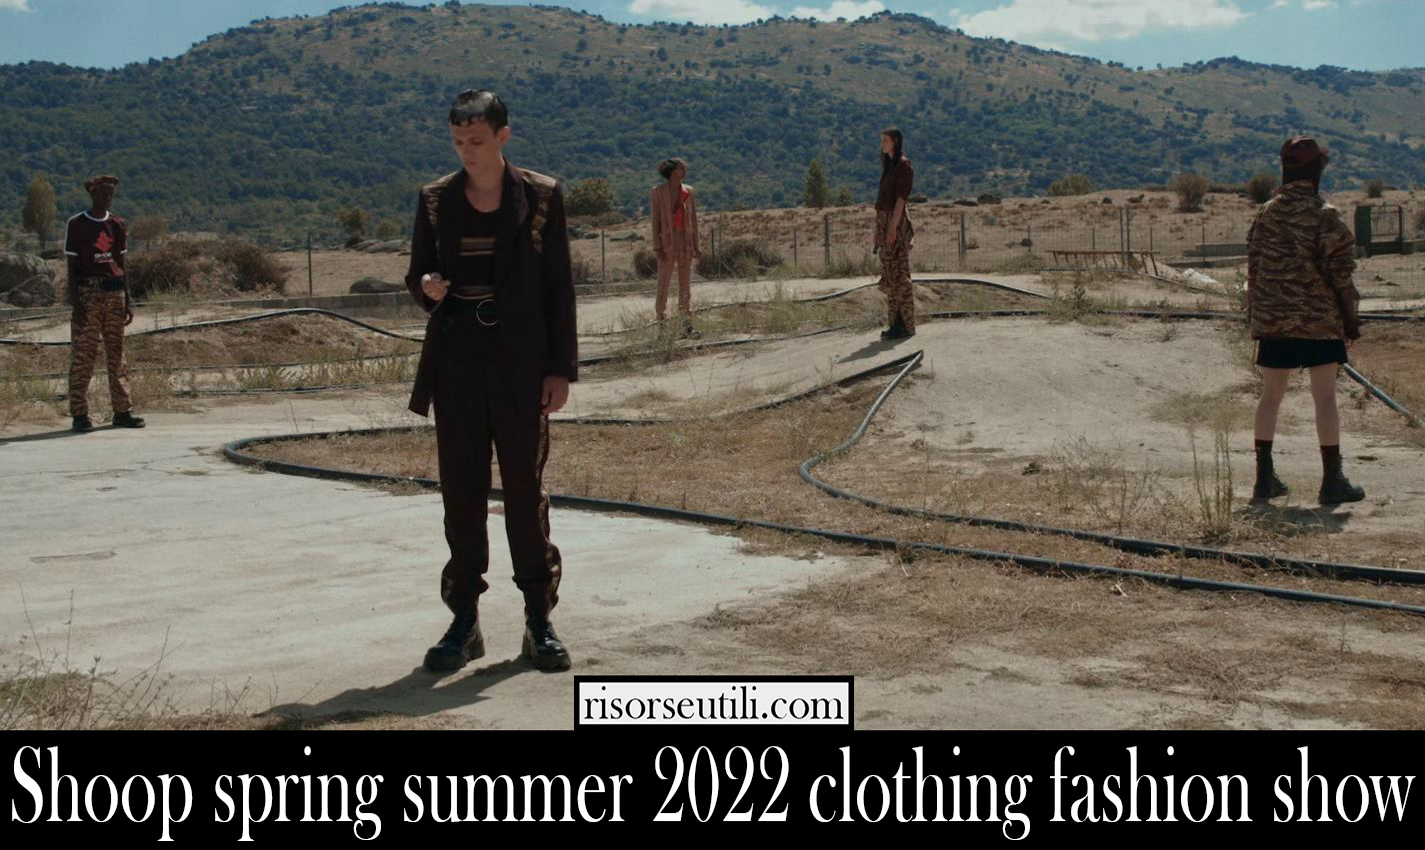 Shoop spring summer 2022 clothing fashion show